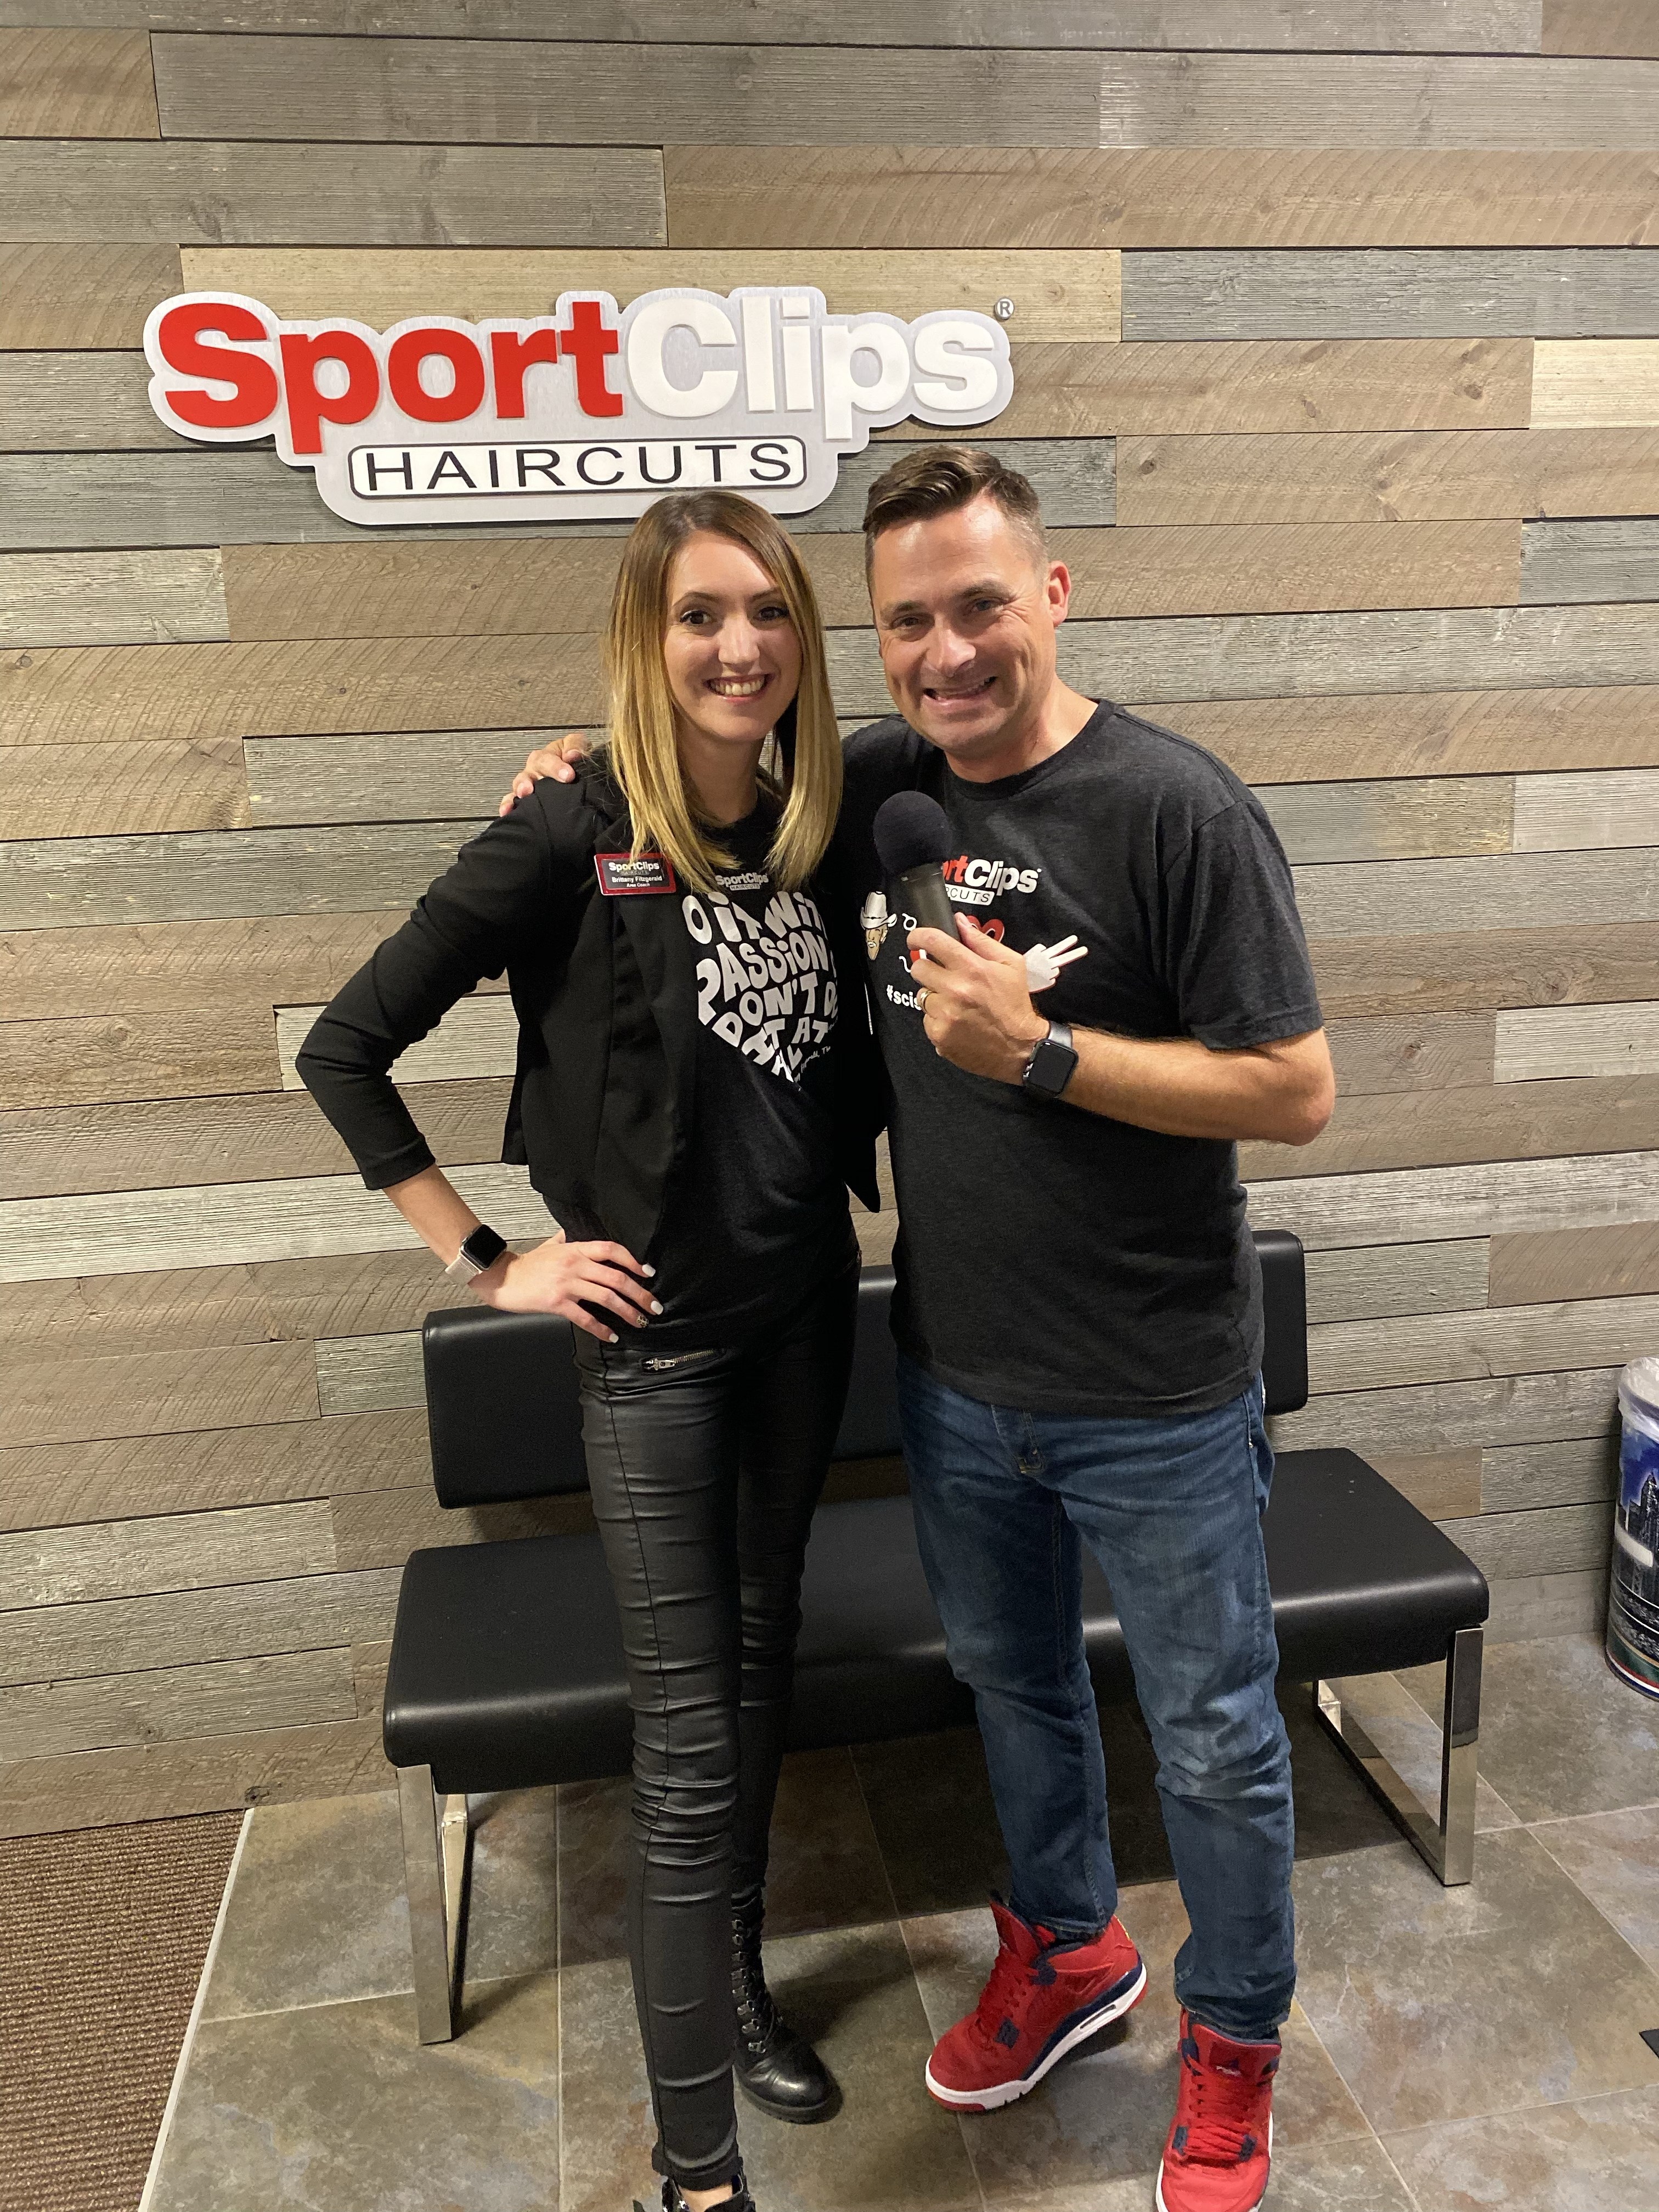 Man and woman standing in front of Sport Clips sign holding a microphone